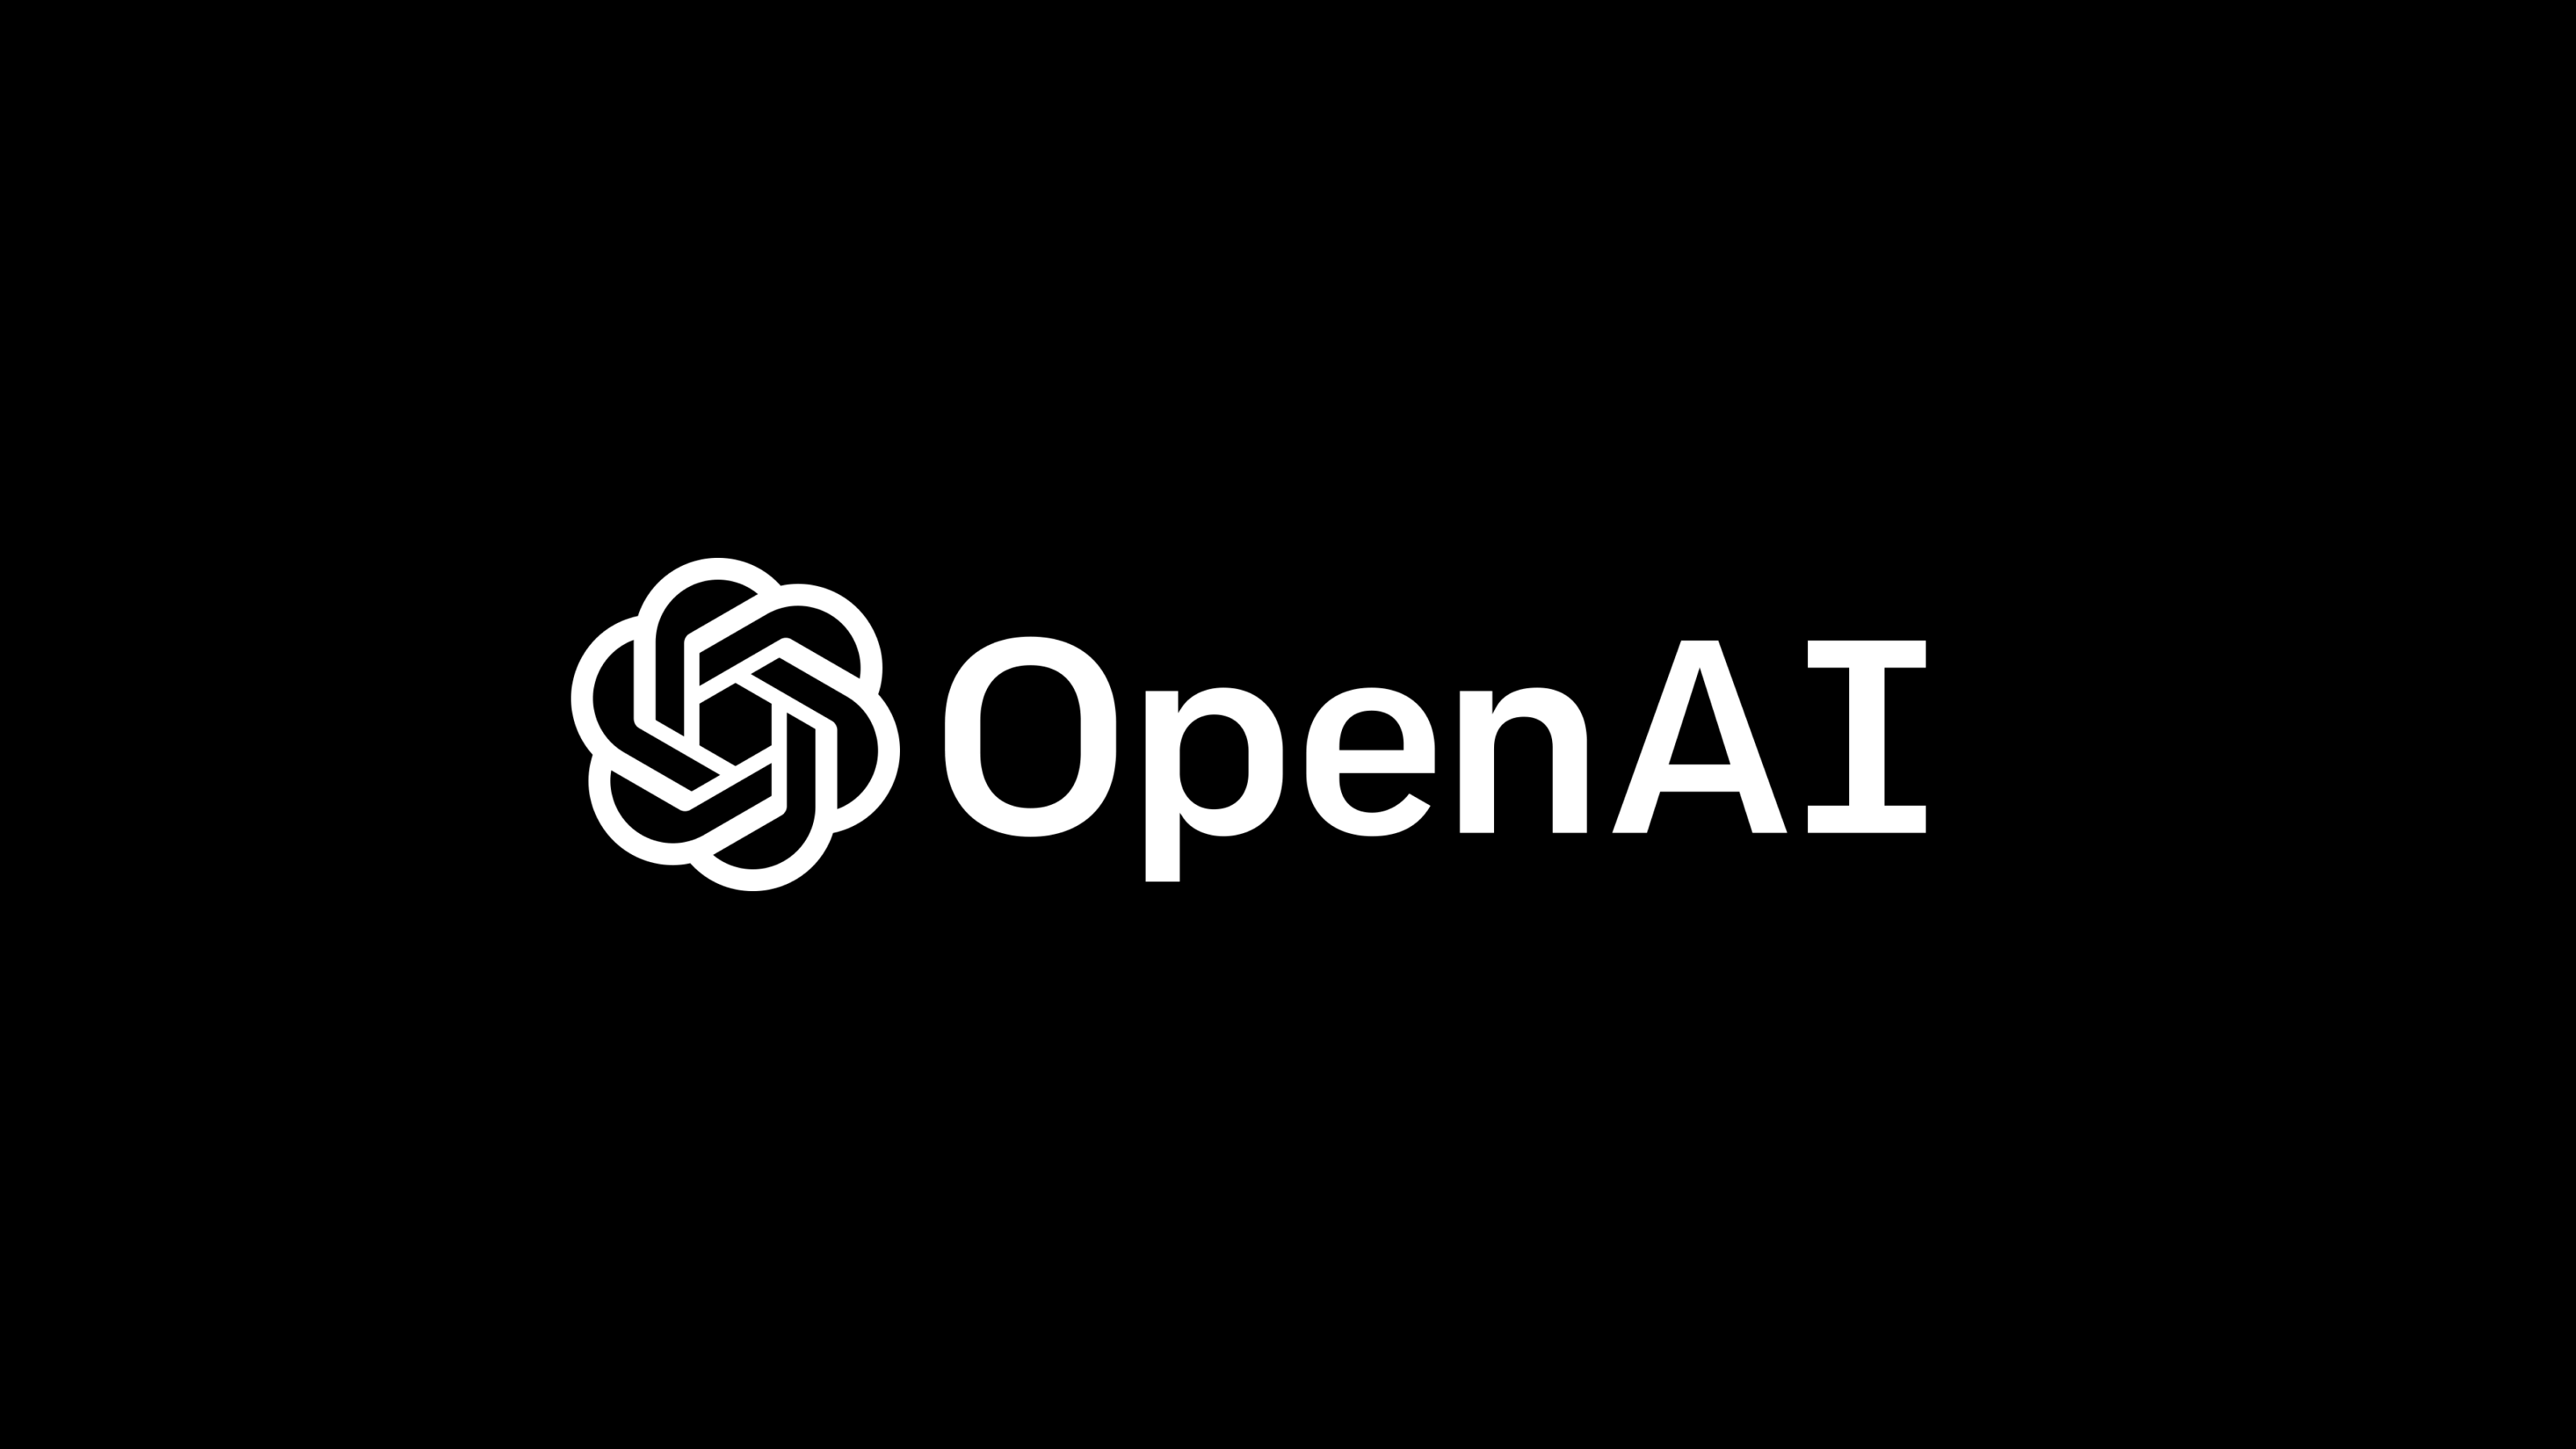 chatgpt-costs-rs-5-crore-daily-openai-might-go-bankrupt